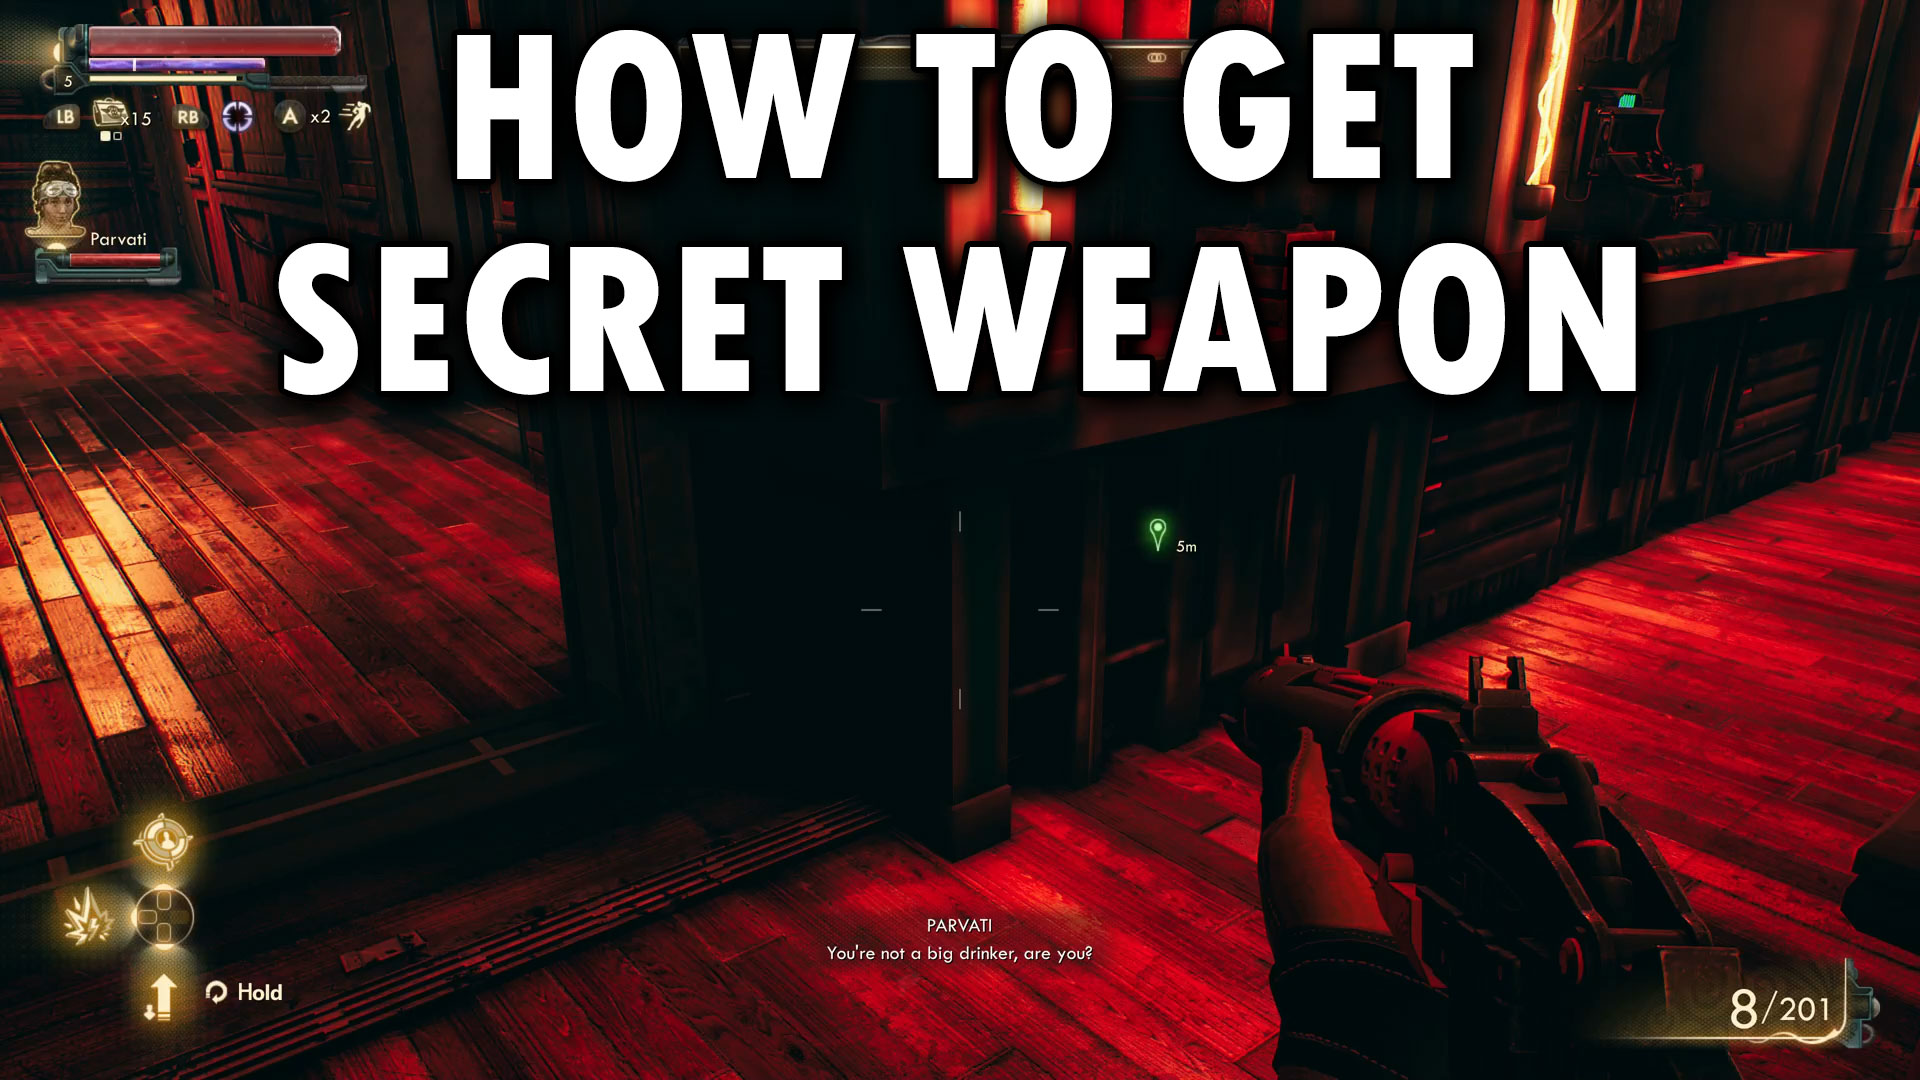 How To Get The Secret Weapon: Die Robot - The Outer Worlds HOW TO GET SECRET WEAPON